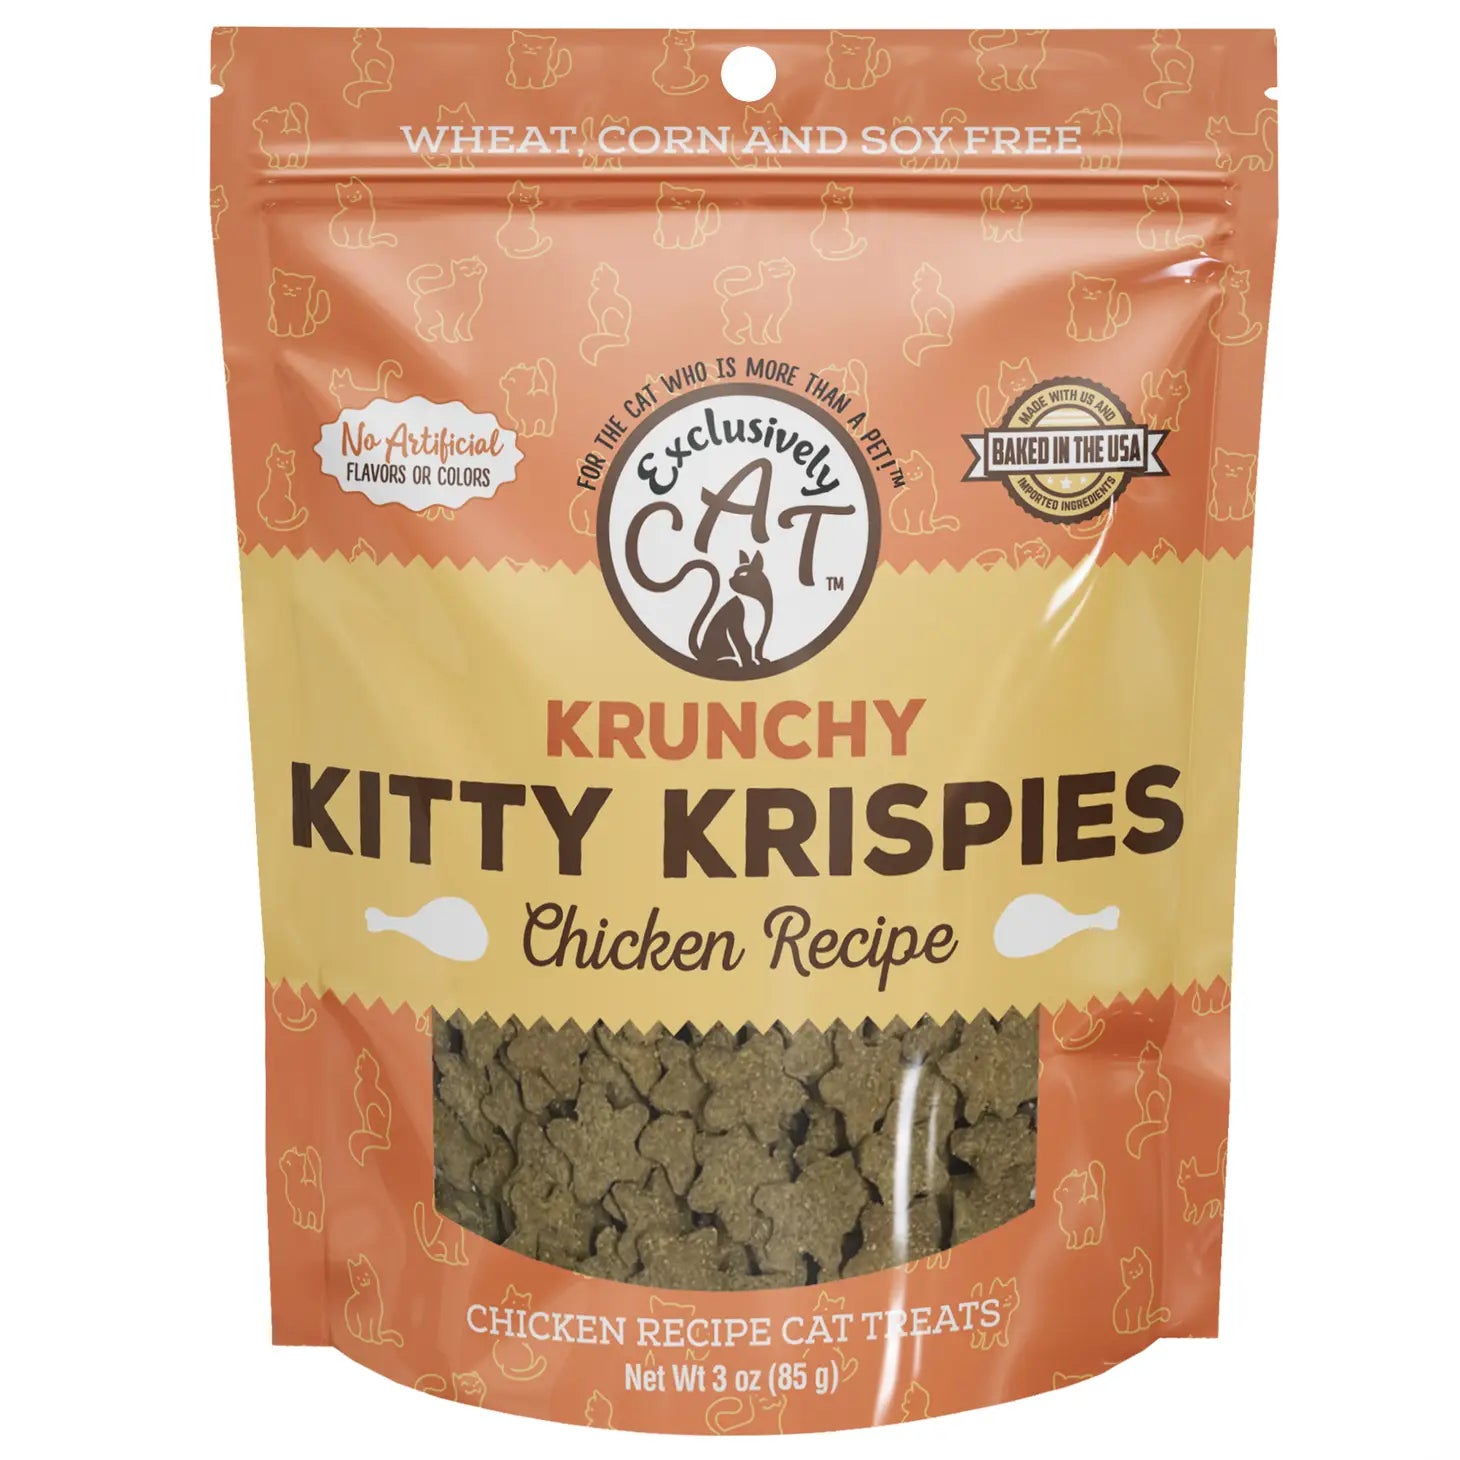 Krunchy Kitty Krispies by Exclusively Cat